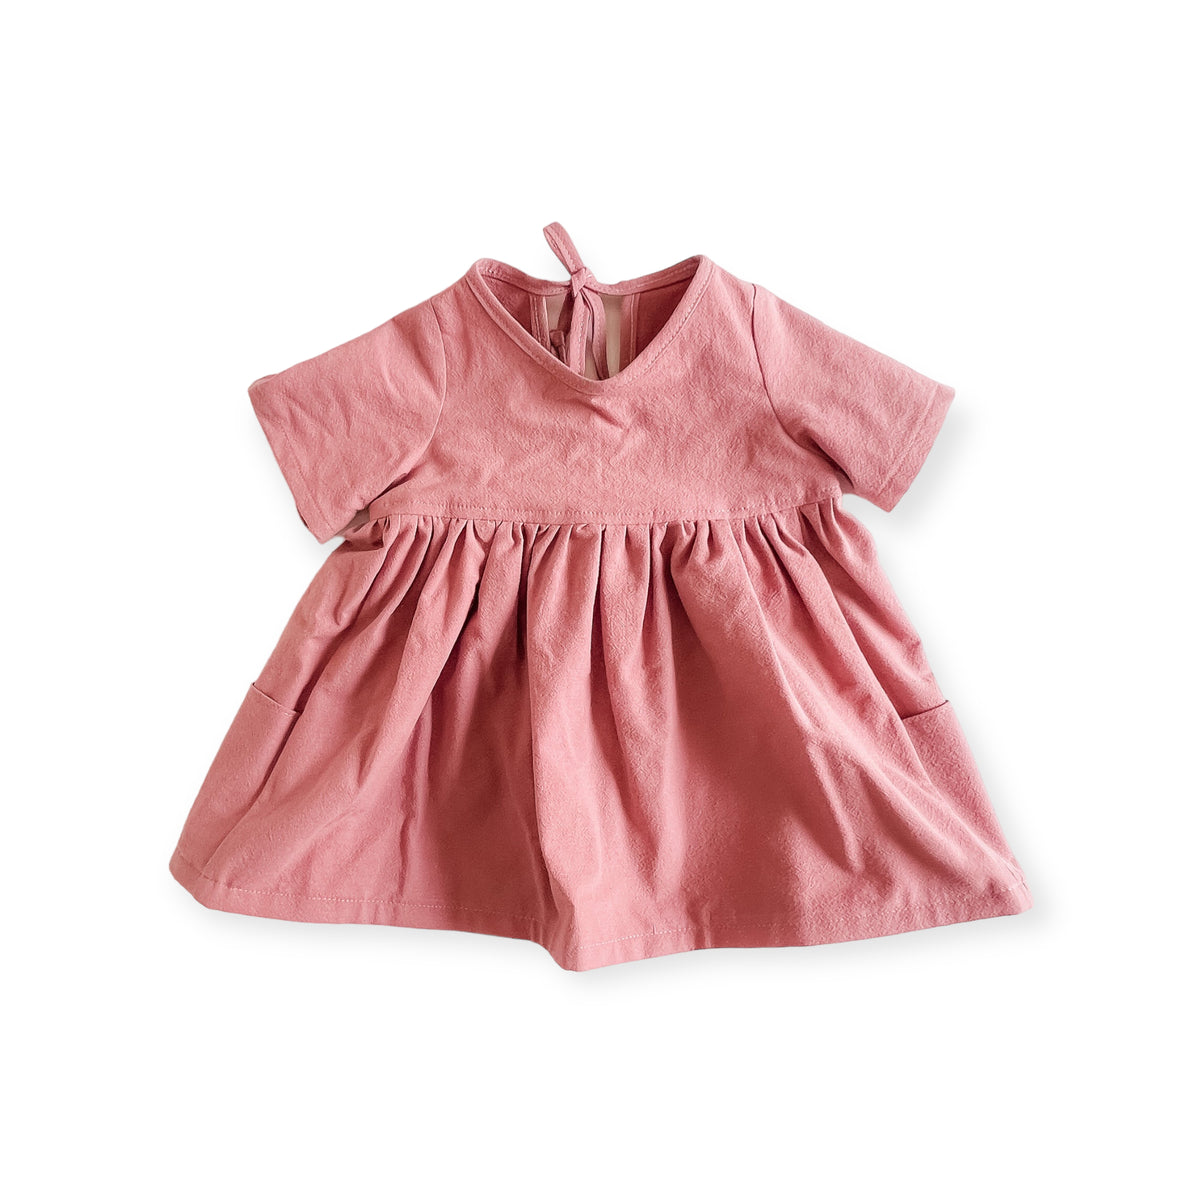 Nora Short-Sleeved Tunic with Pockets in 'Desert Rose Crepe' - Ready To Ship